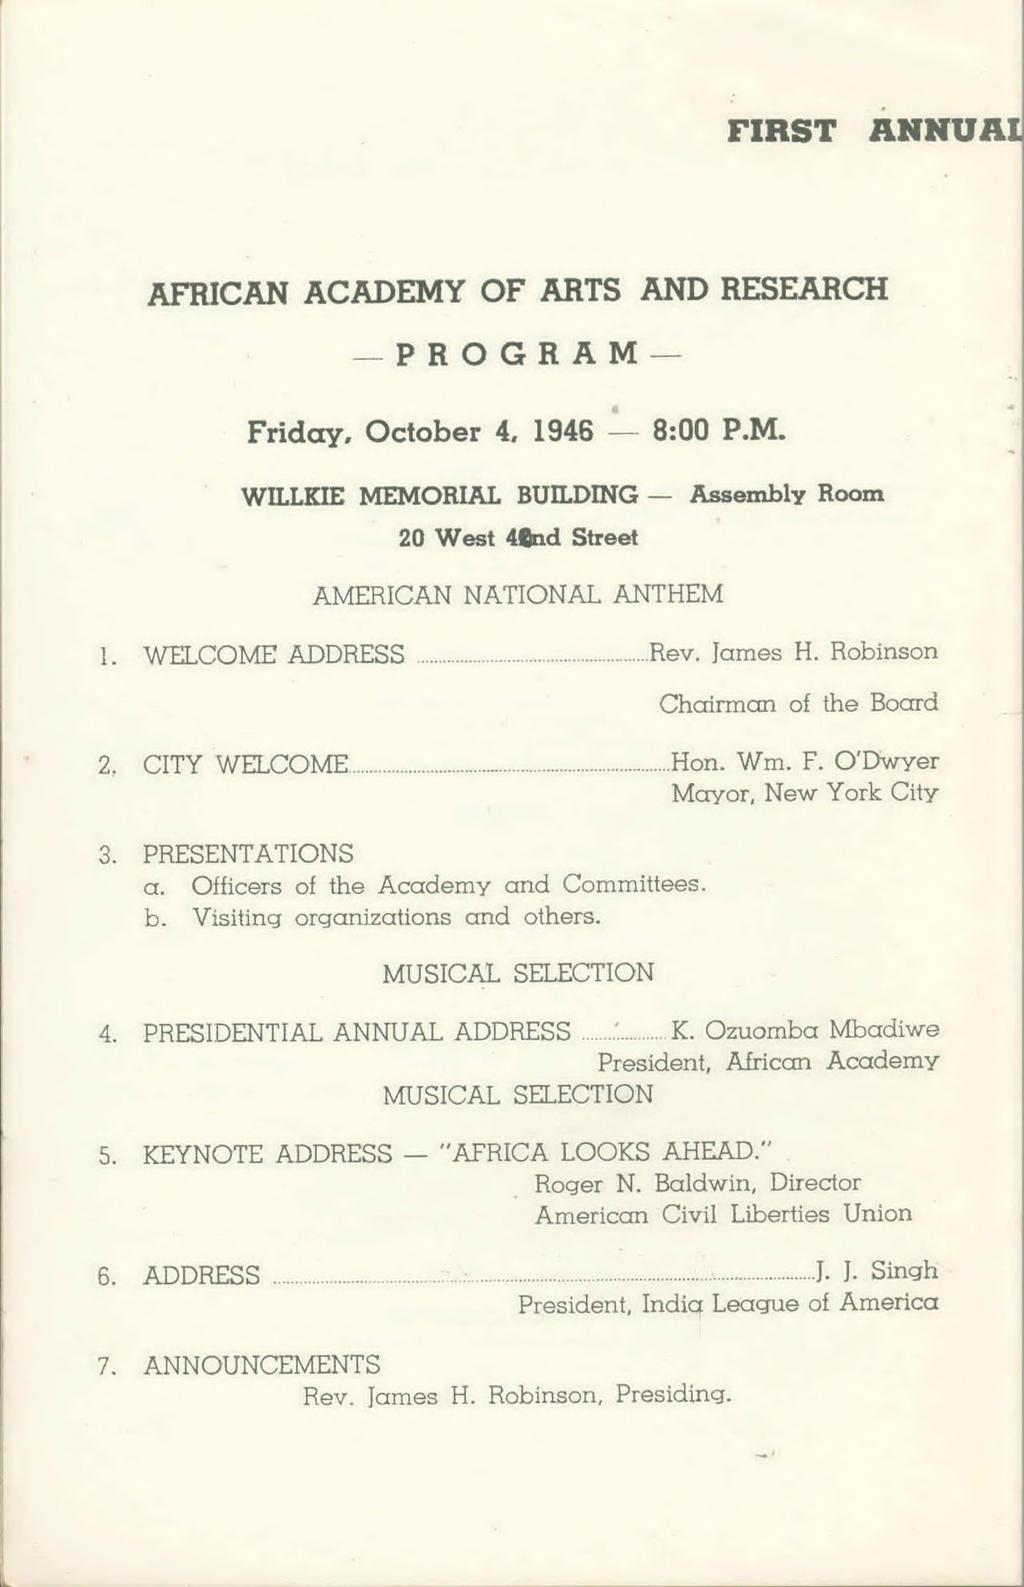 FIRST ANNUAi AFRICAN ACADEMY OF ARTS AND RESEARCH PROGRAM Friday, October 4, 1946 8:00 P.M. WILLKIE MEMORIAL BUILDING Assembly Room 20 West 4 nd Street AMERICAN NATIONAL ANTHEM 1. WELCOME ADDRESS...Rev.